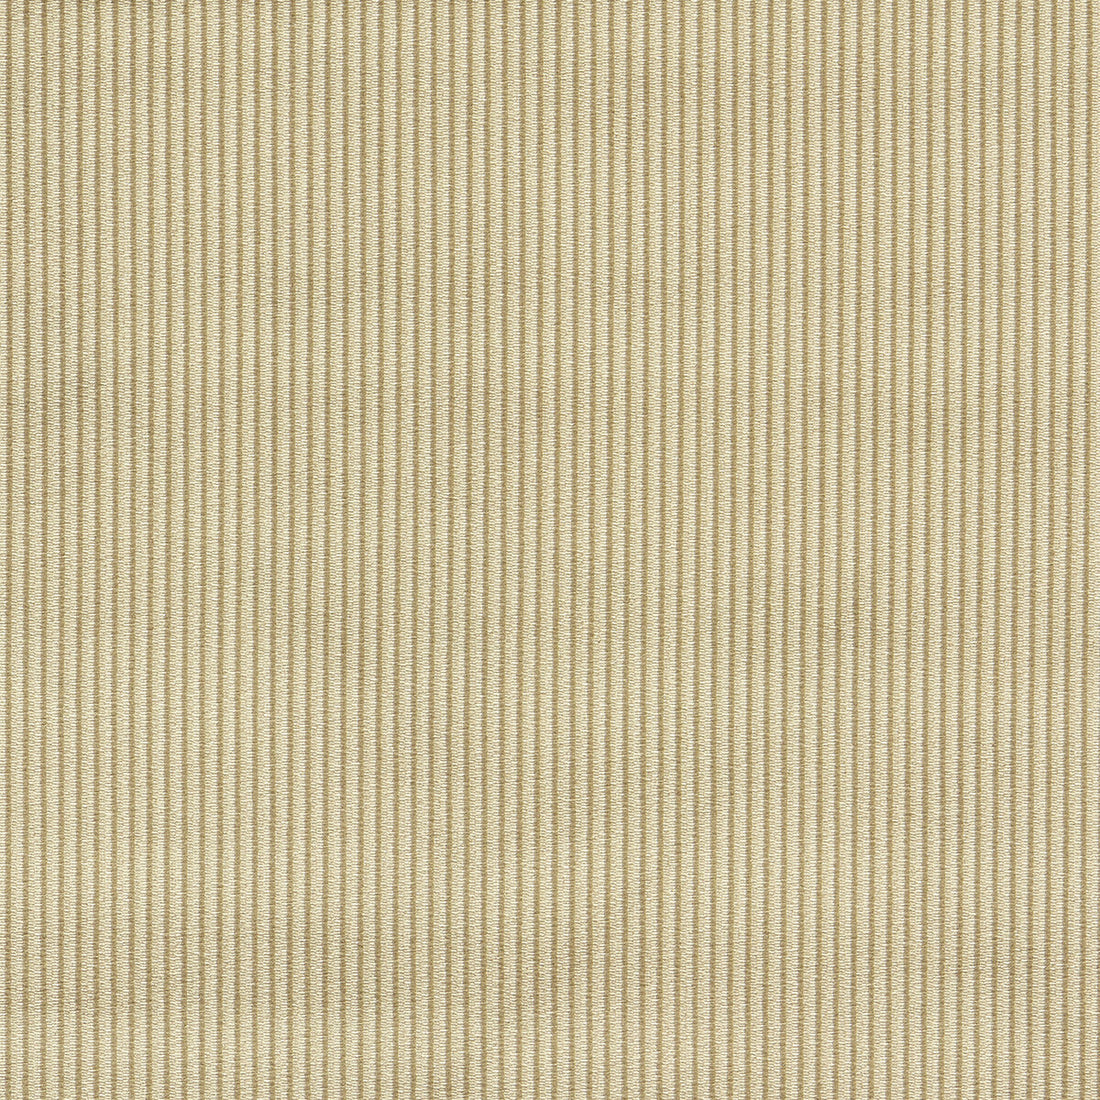 Ashdown fabric in antique color - pattern F1688/01.CAC.0 - by Clarke And Clarke in the Whitworth collection